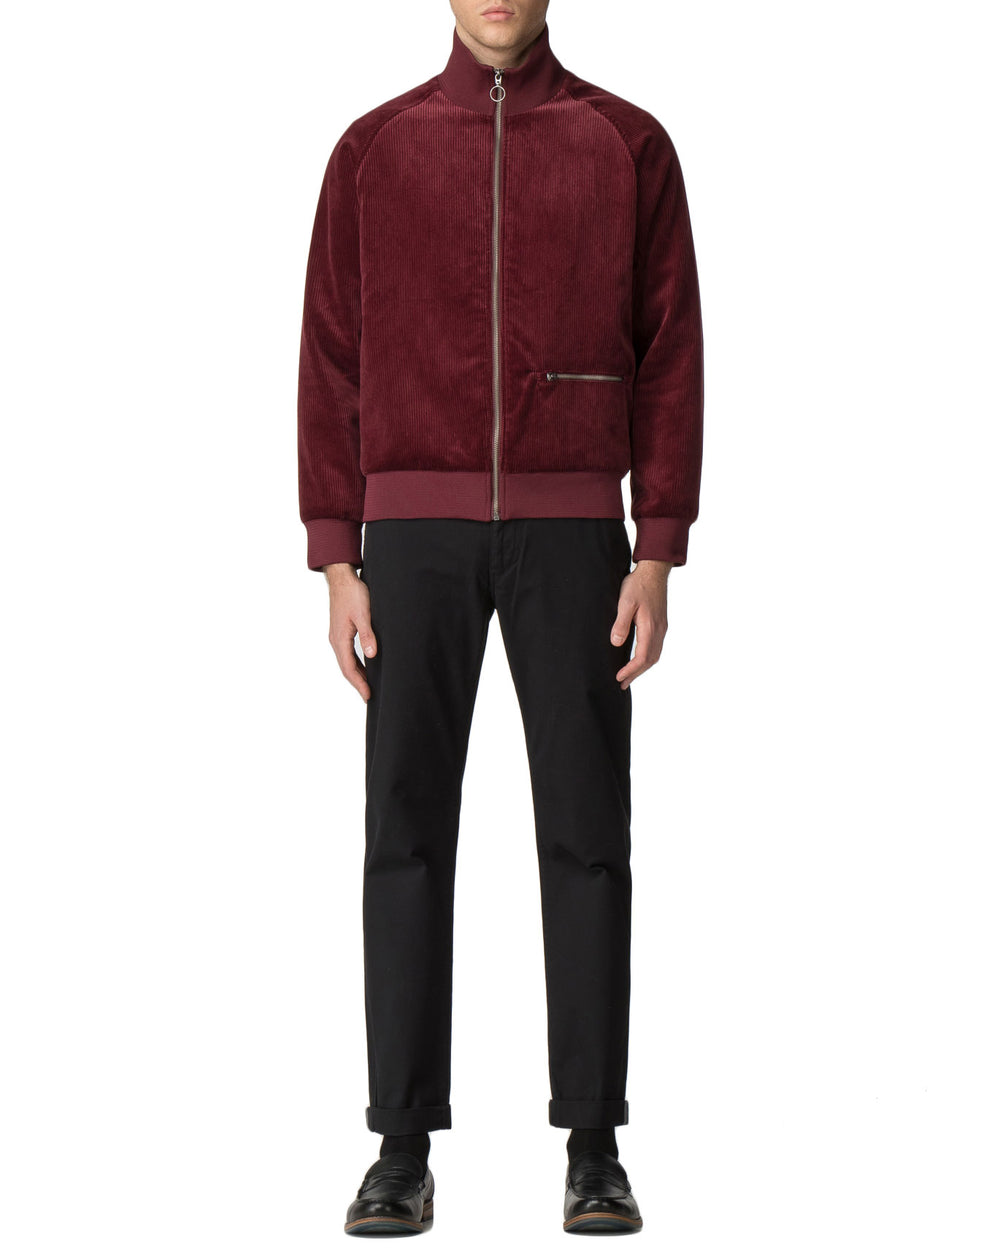 Cord/Faux Suede Track Jacket - Burgundy